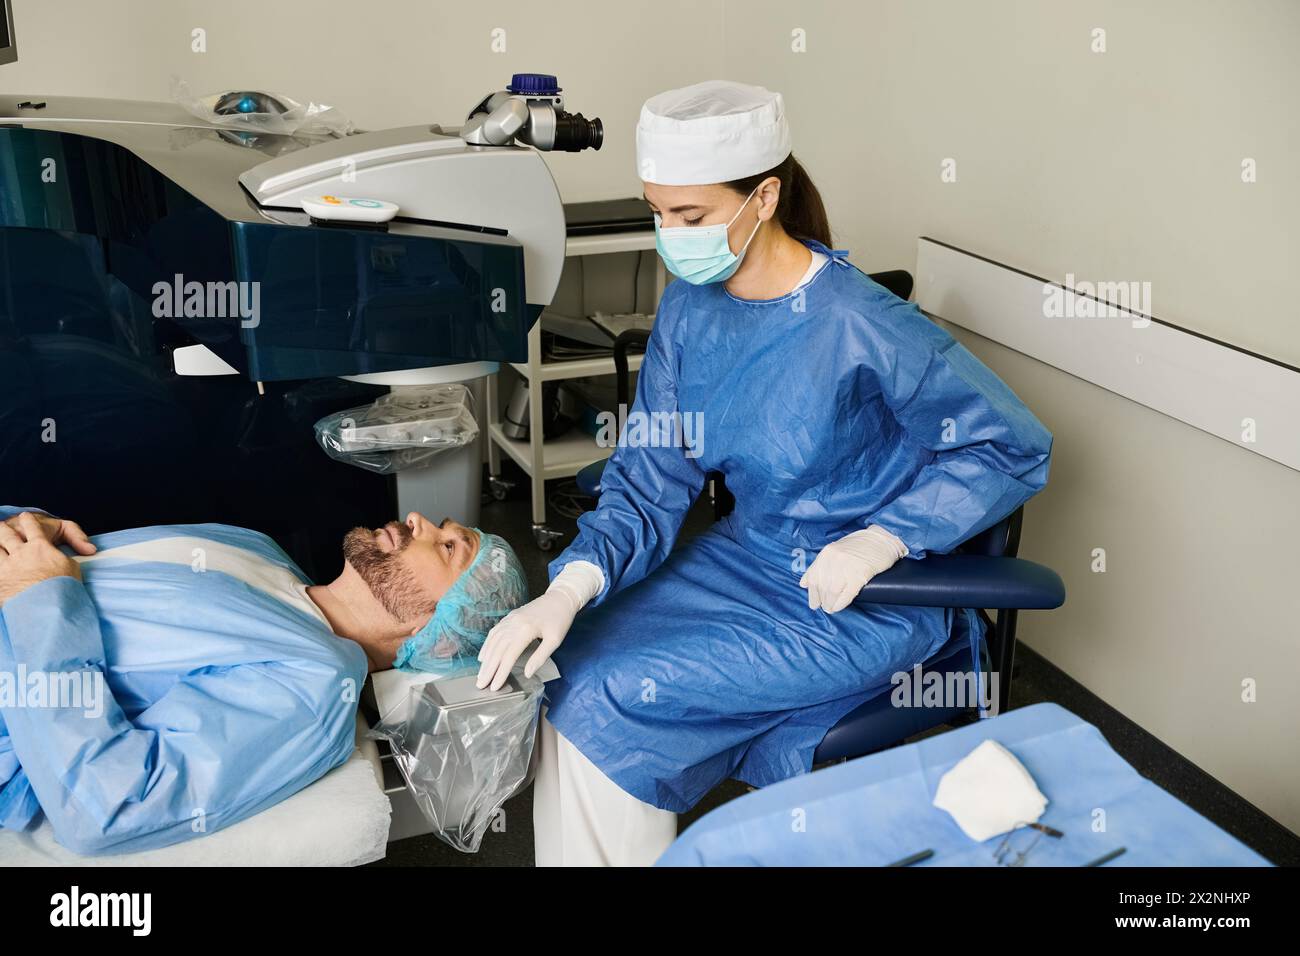 Woman and man in blue gowns await laser vision correction at hospital. Stock Photo